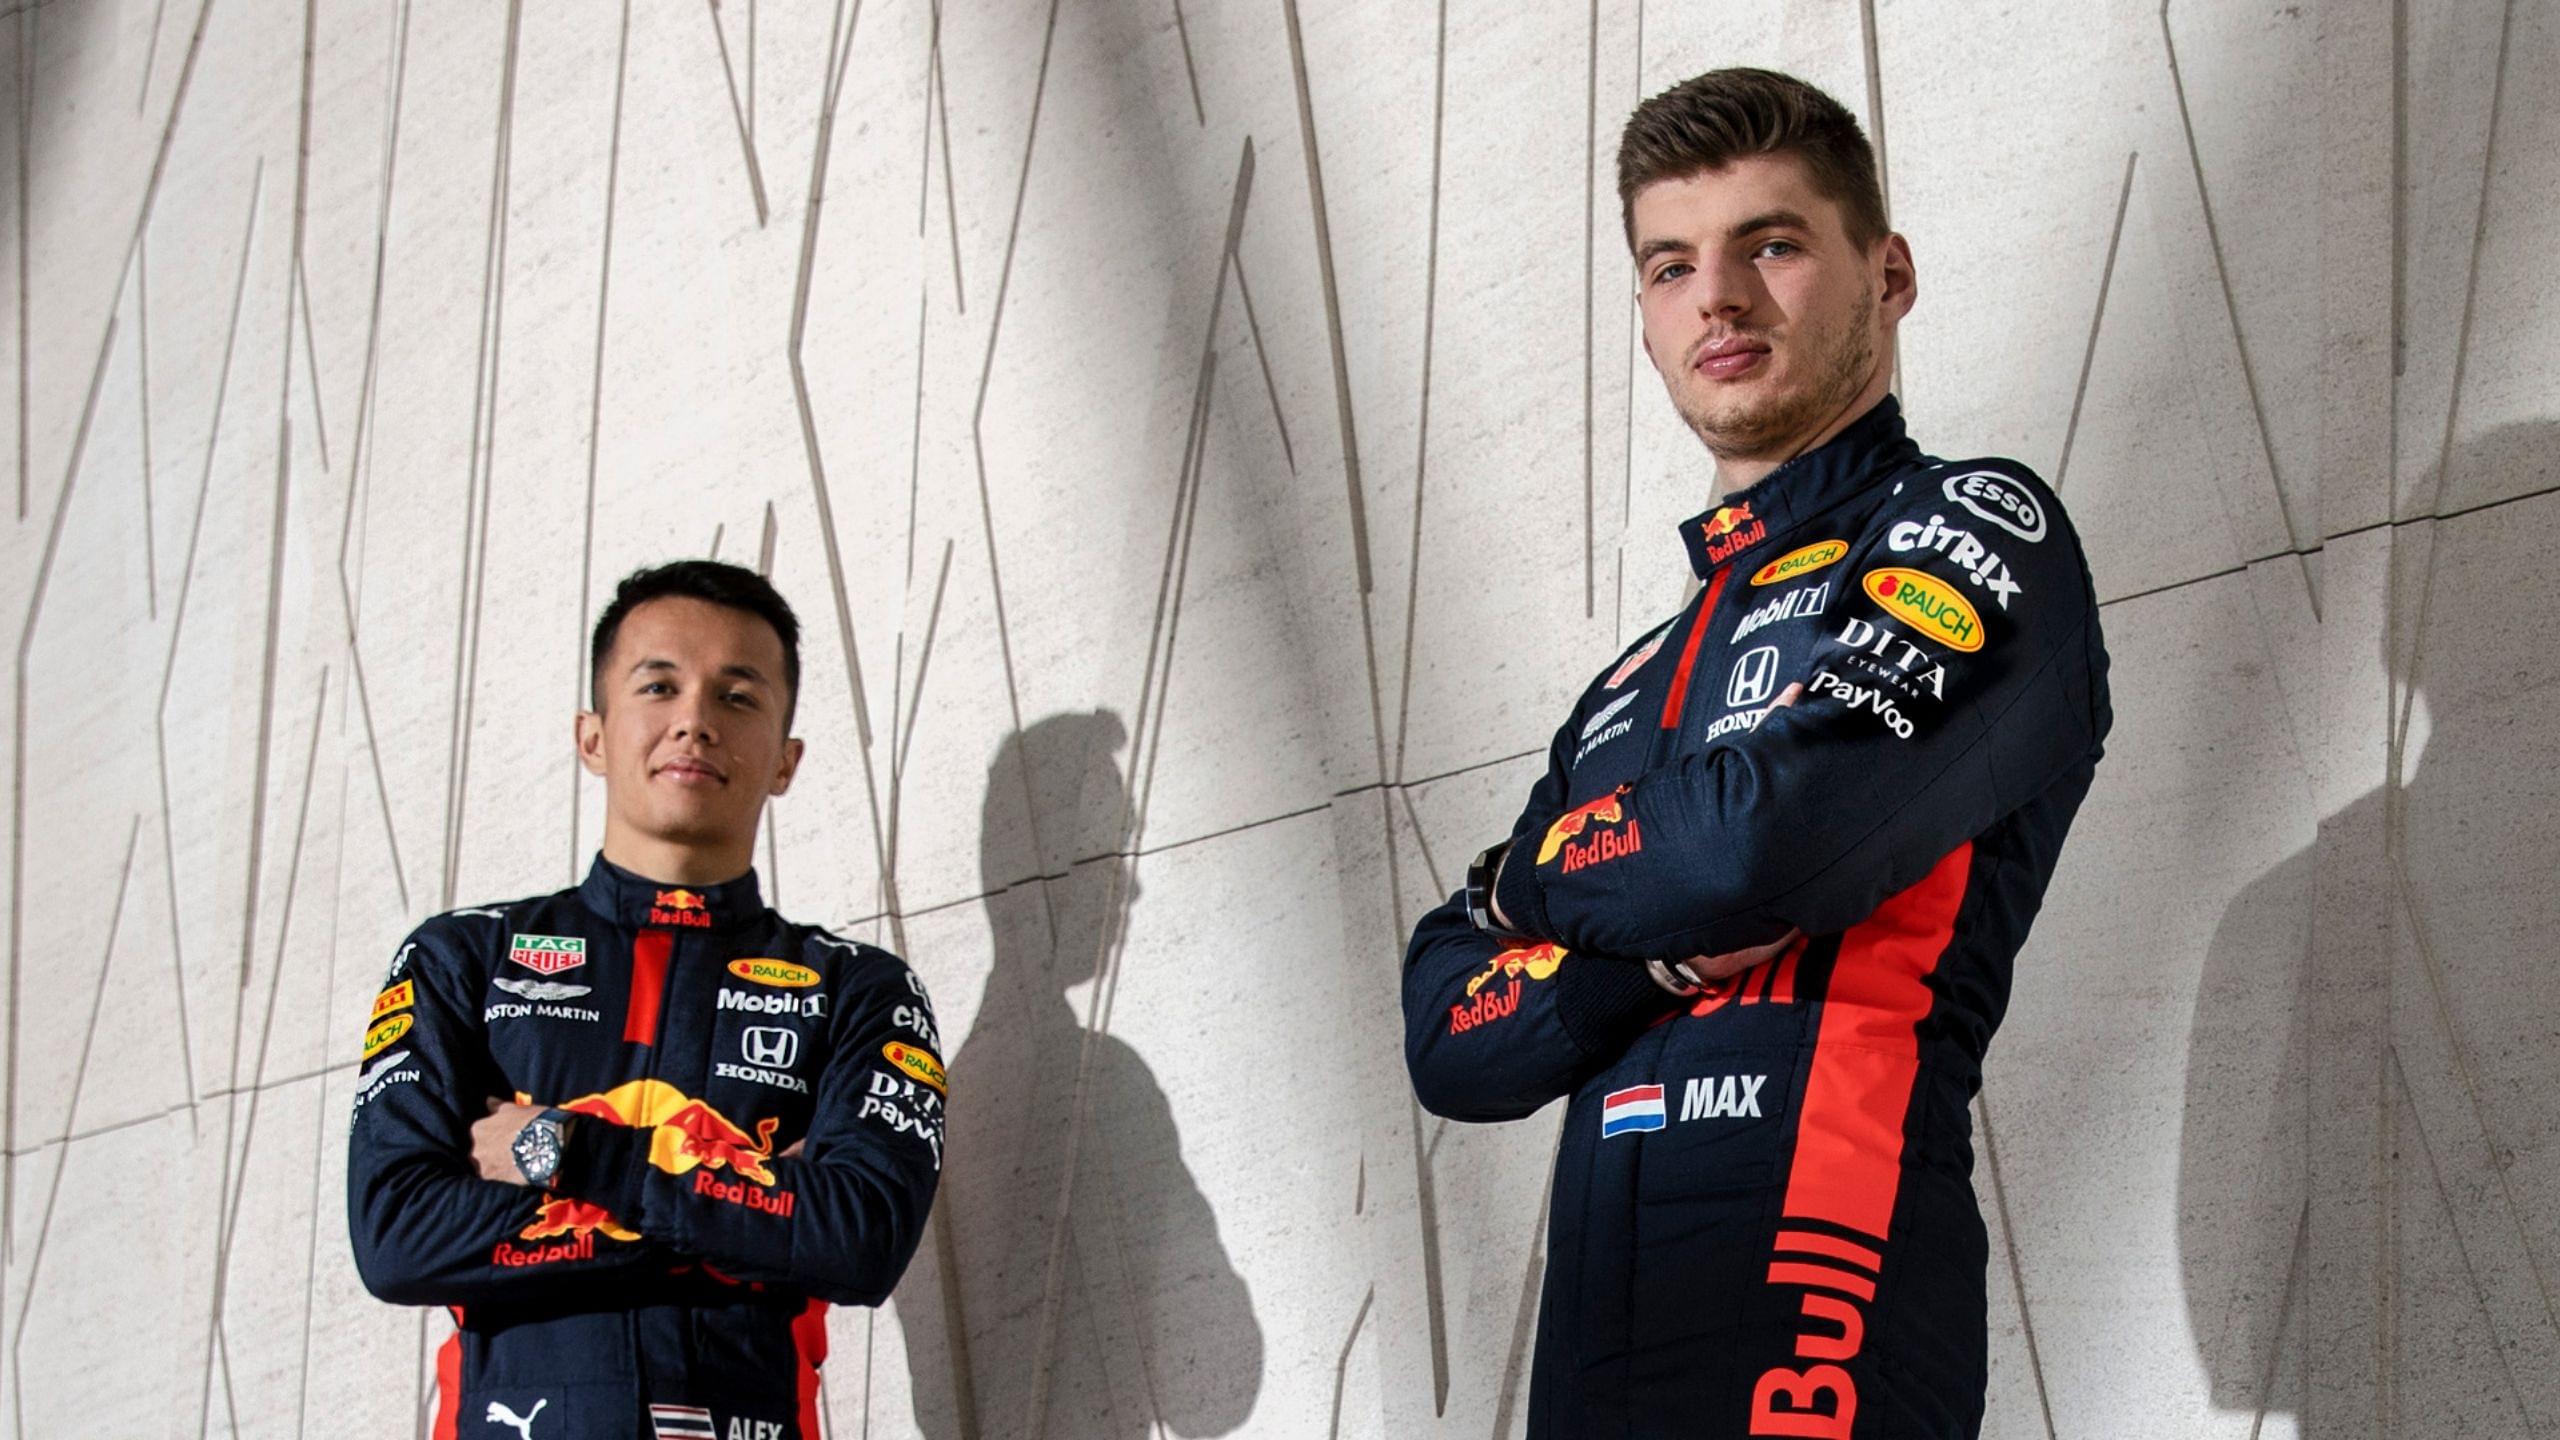 “My dream is to be with Red Bull for a long time” - Alex Albon issues challenge to Sergio Perez ahead of the Abu Dhabi Grand Prix